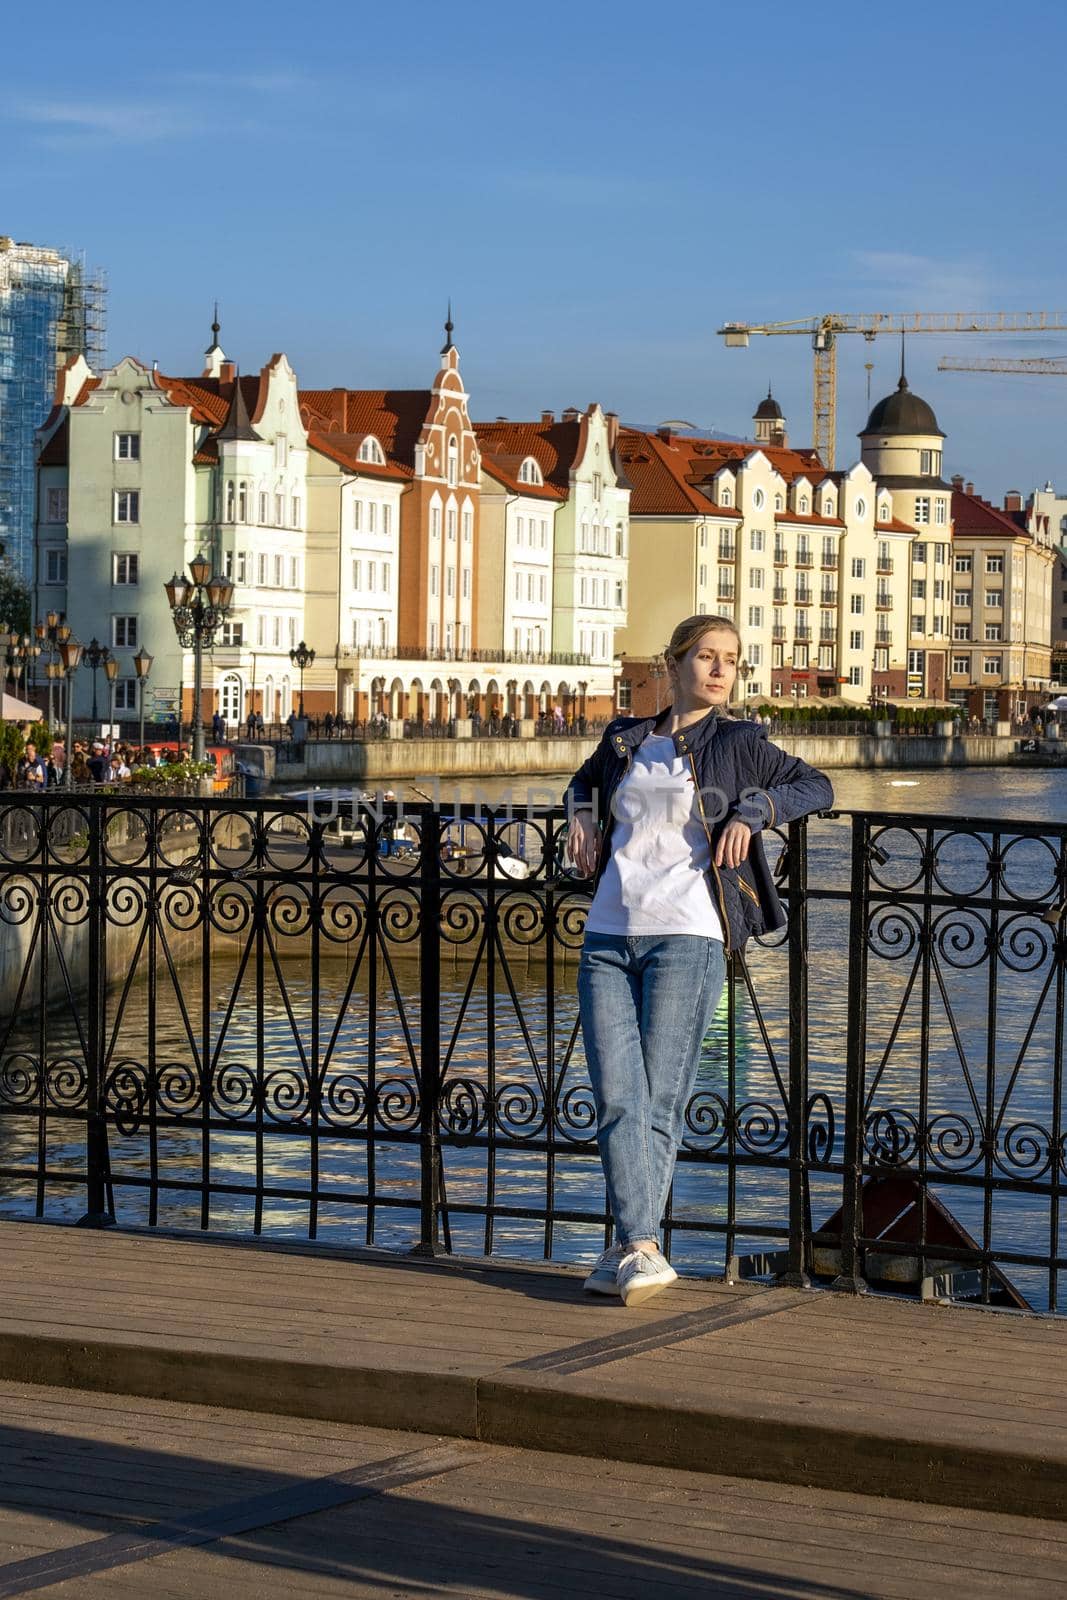 On spring evening, young blonde stands on bridge leaning against railing against backdrop of a beautiful city embankment. Selective focus. Vertical orientation.